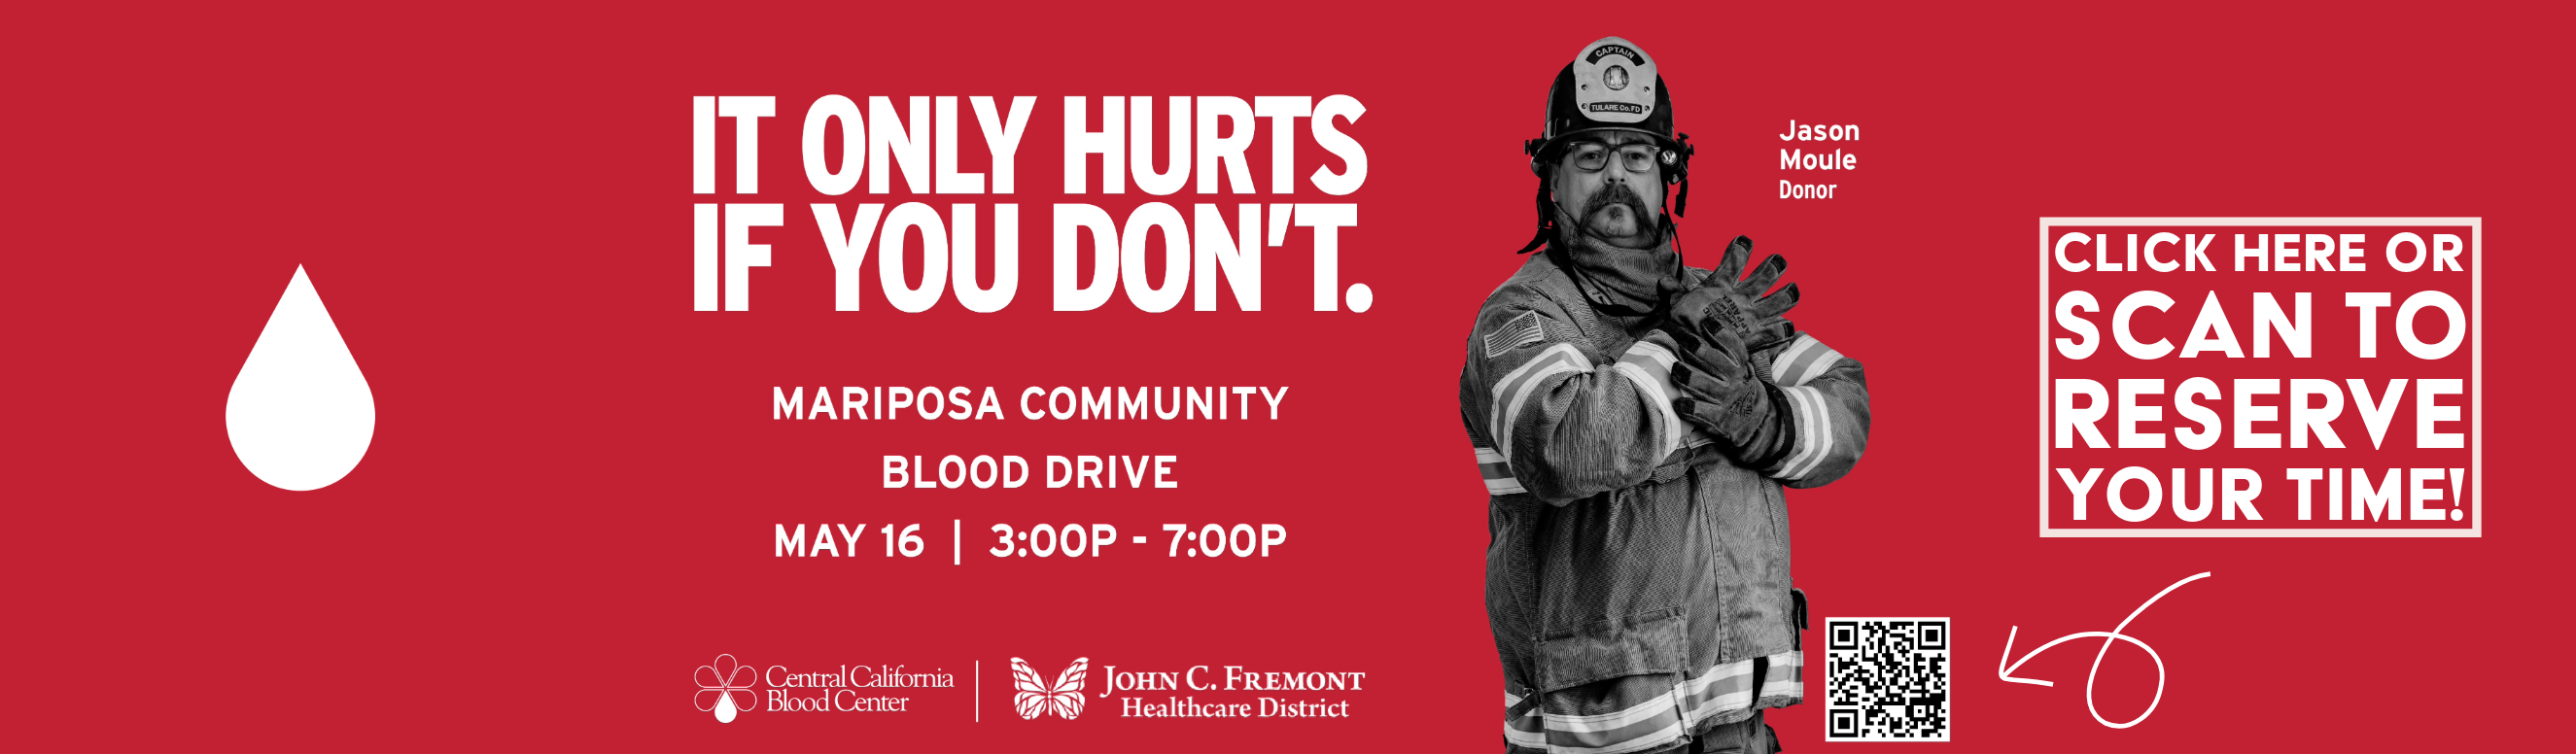 Thursday May 16th is our Mariposa County Blood Drive. 3pm to 7pm at Pioneer Market. Click to sign up for a time.